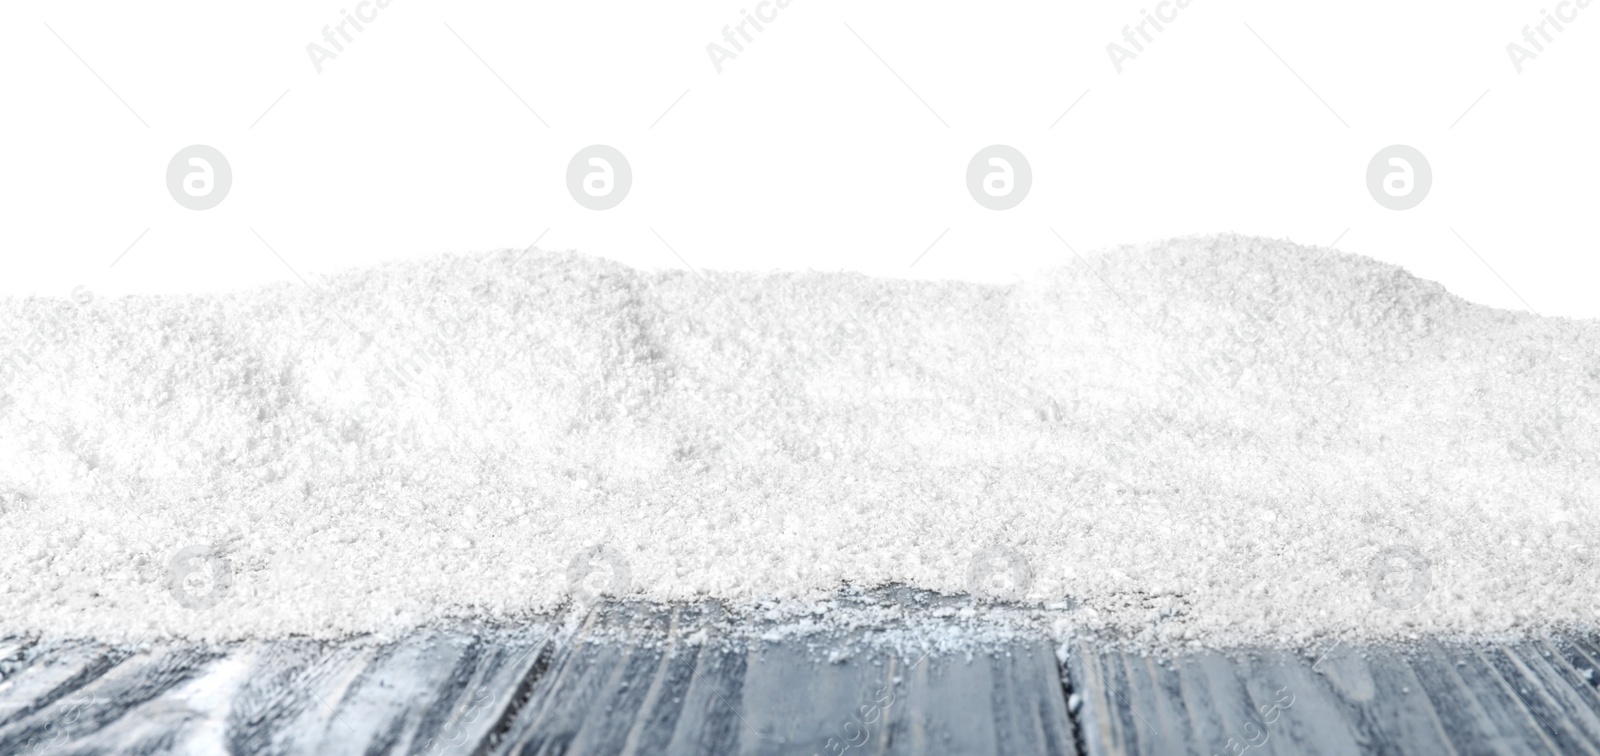 Photo of Heap of snow on grey wooden surface against white background